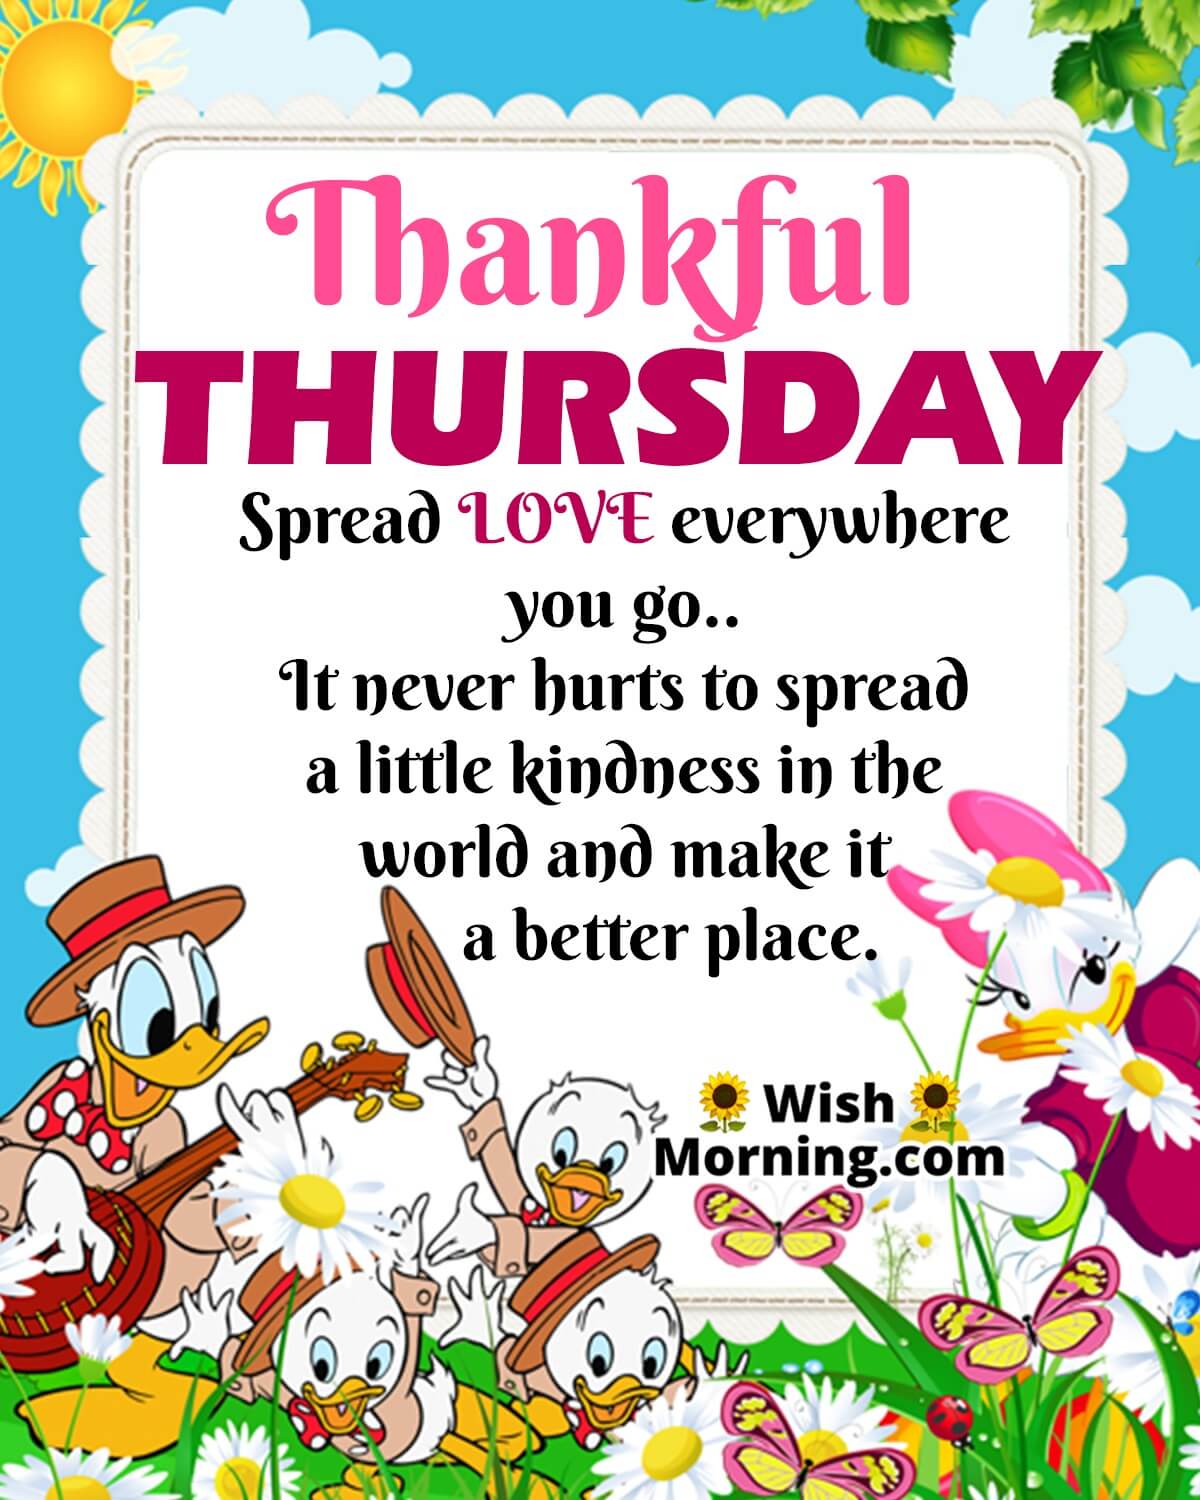 Thankful Thursday Messages